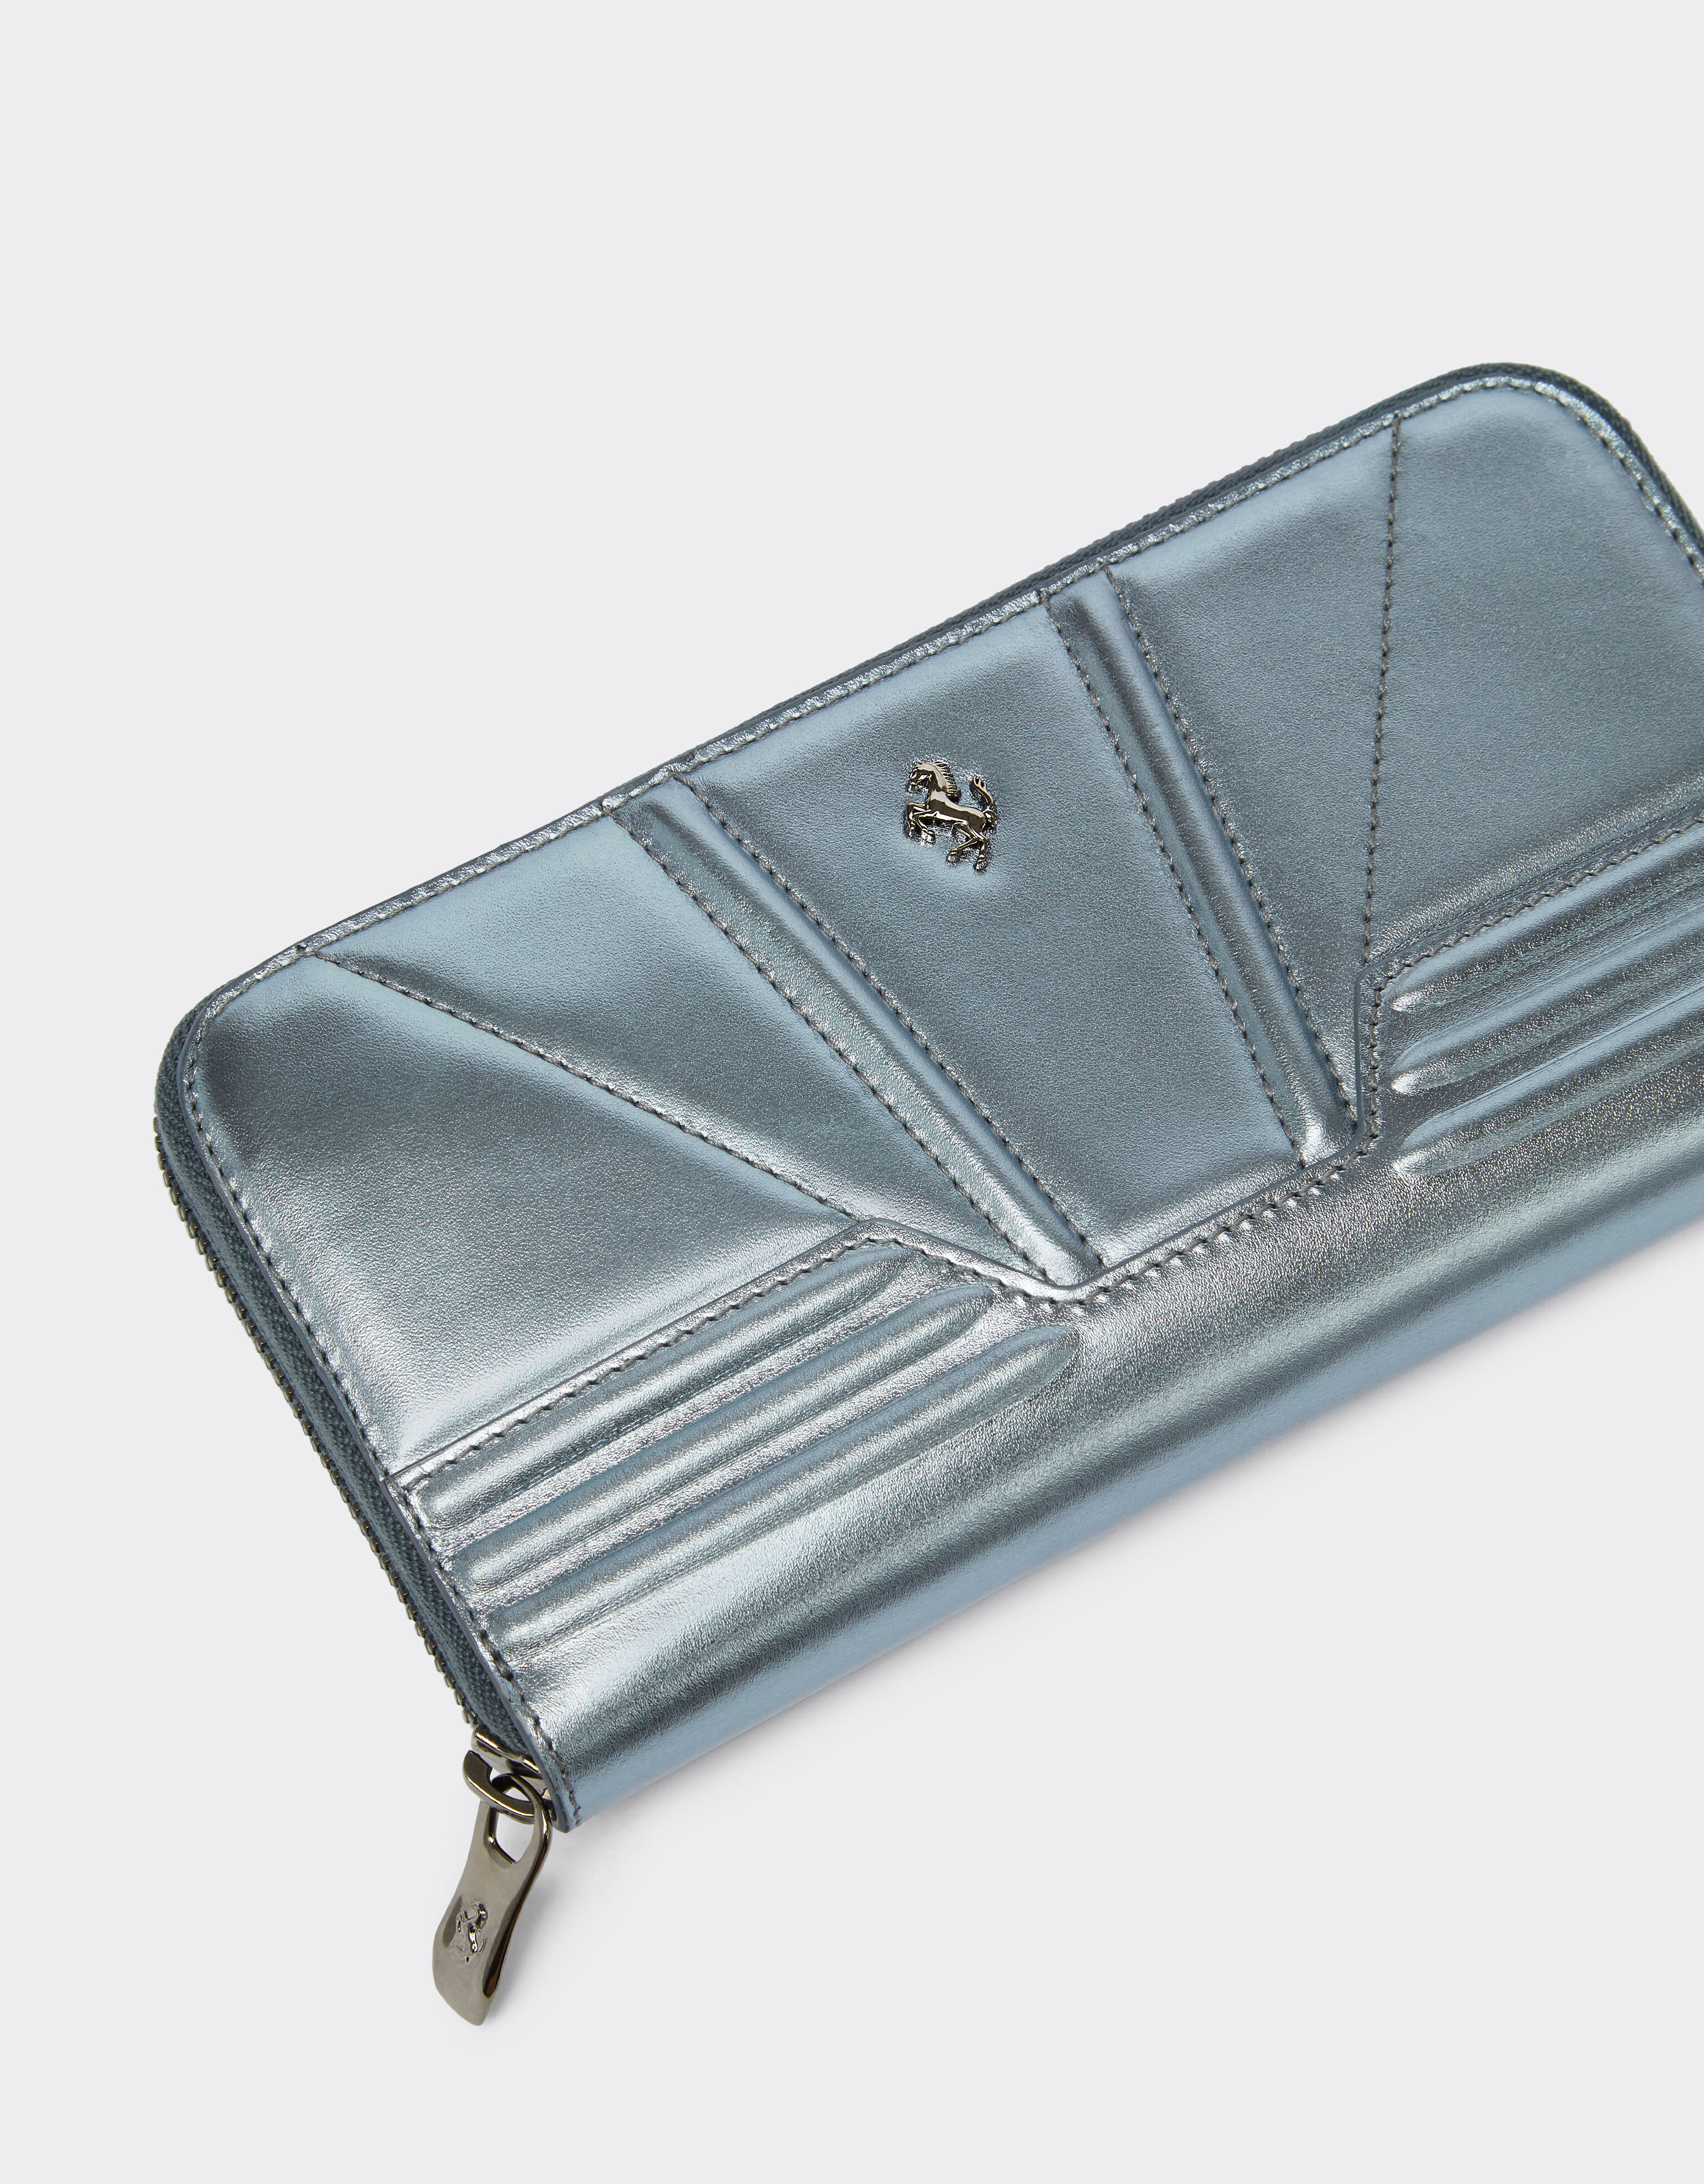 Ferrari Wallet in laminated leather with zip Azure 20245f